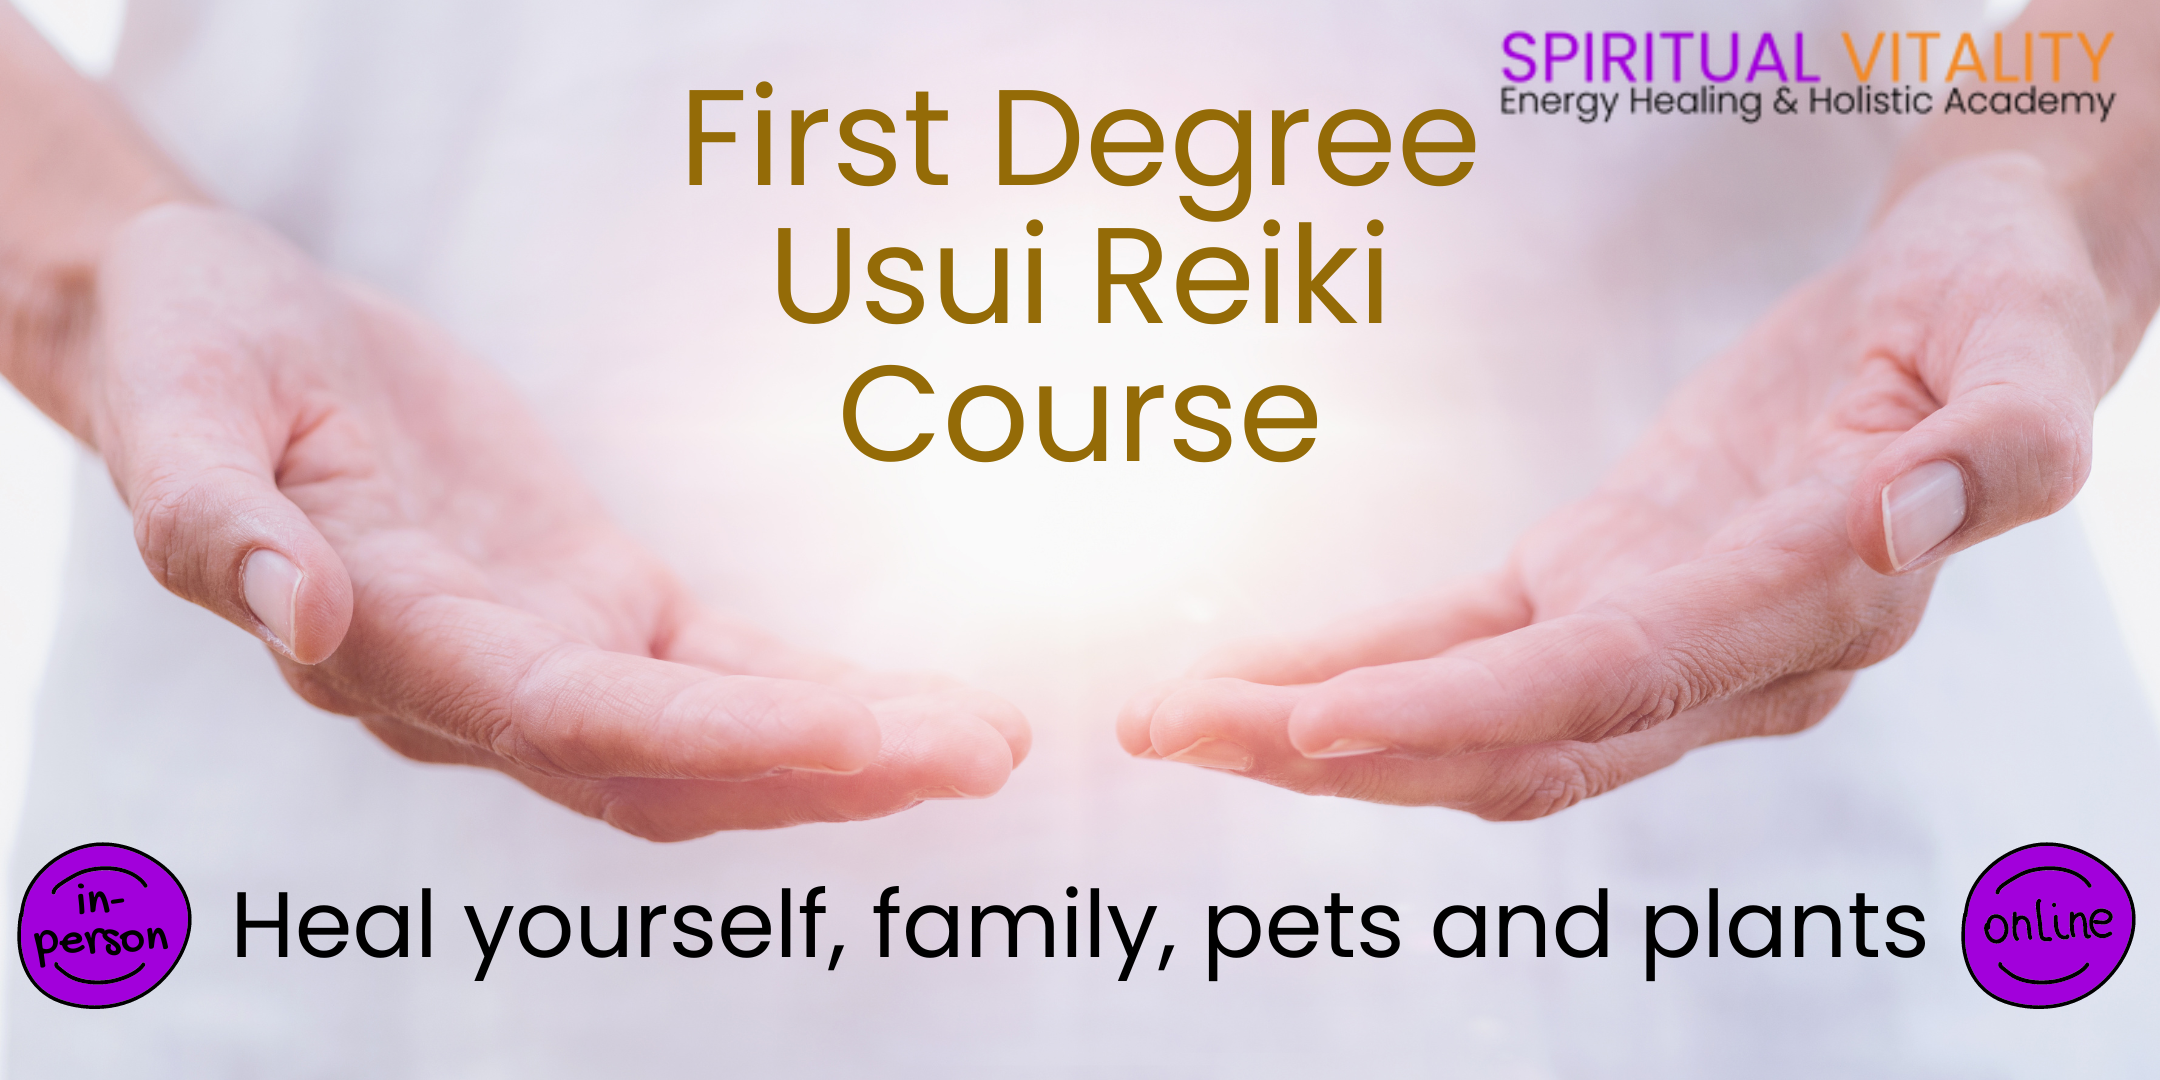 First Degree Usui Reiki Course